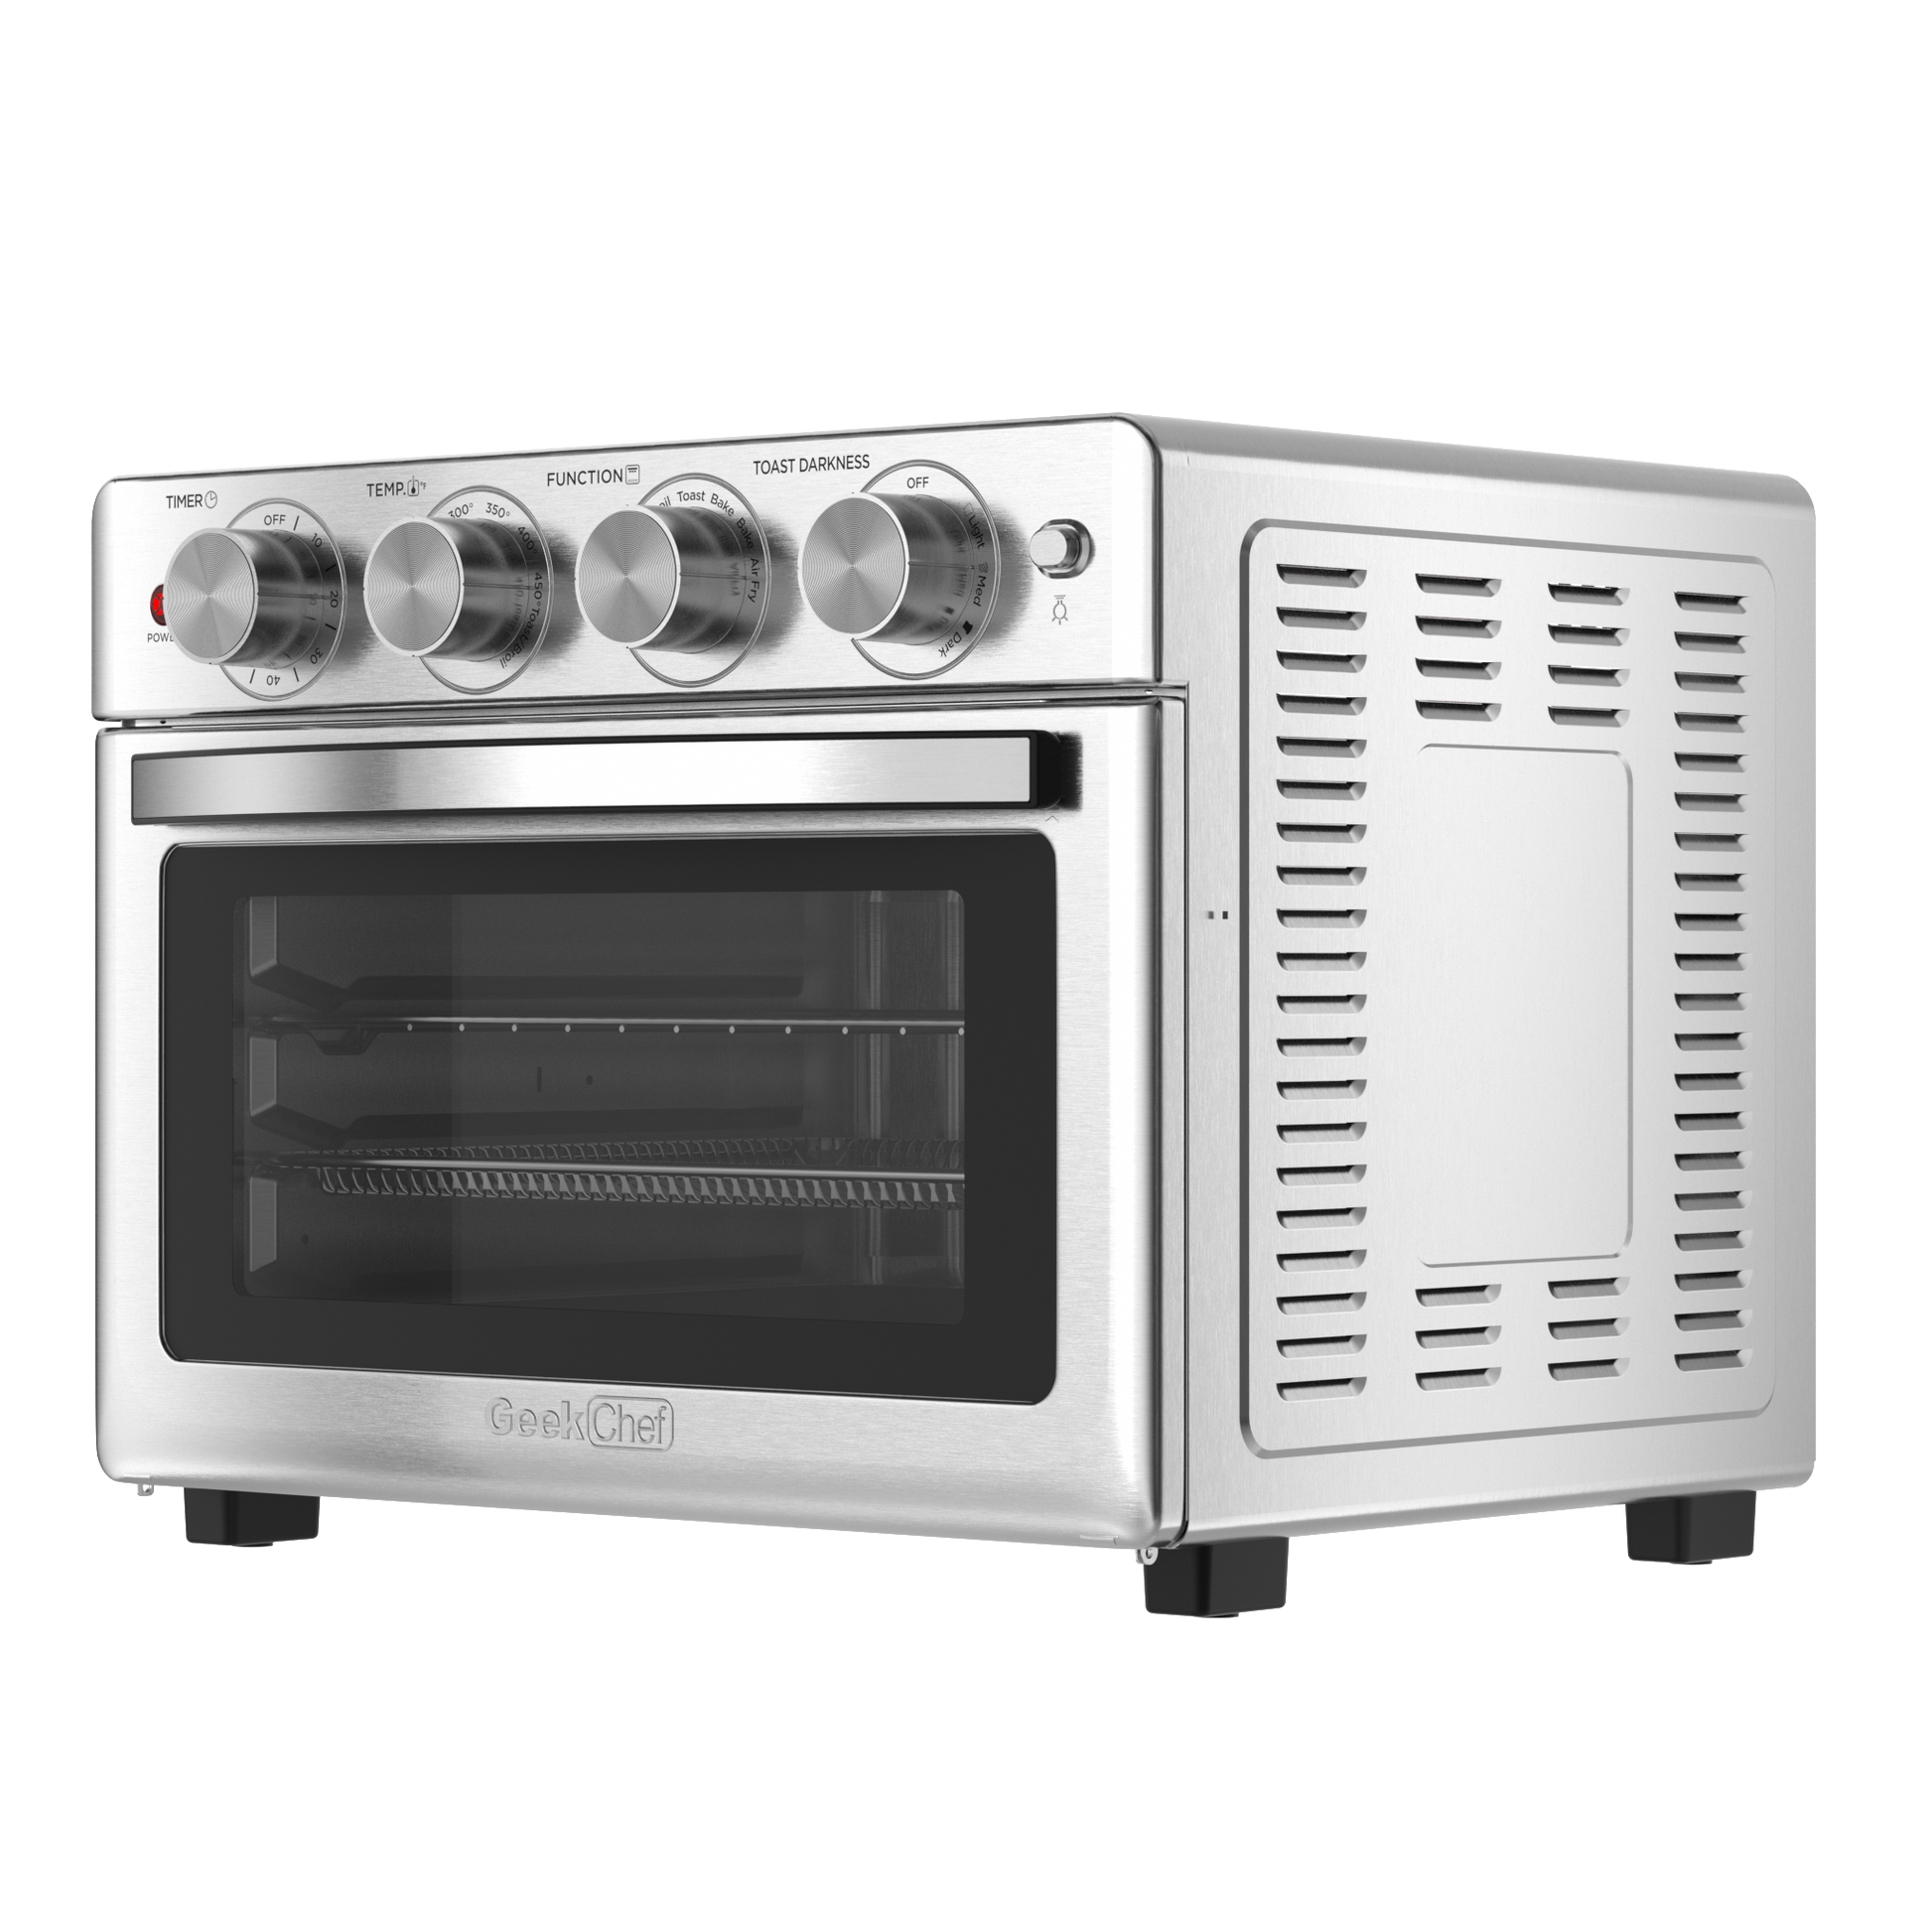 Geek Chef Air Fryer Toaster Oven, 6 Slice 24QT Convection Airfryer  Countertop Oven, Roas, Broil, Reheat, Fry Oil-Free, Stainless Steel,  Silver, 1700W.Prohibited to be listed on  